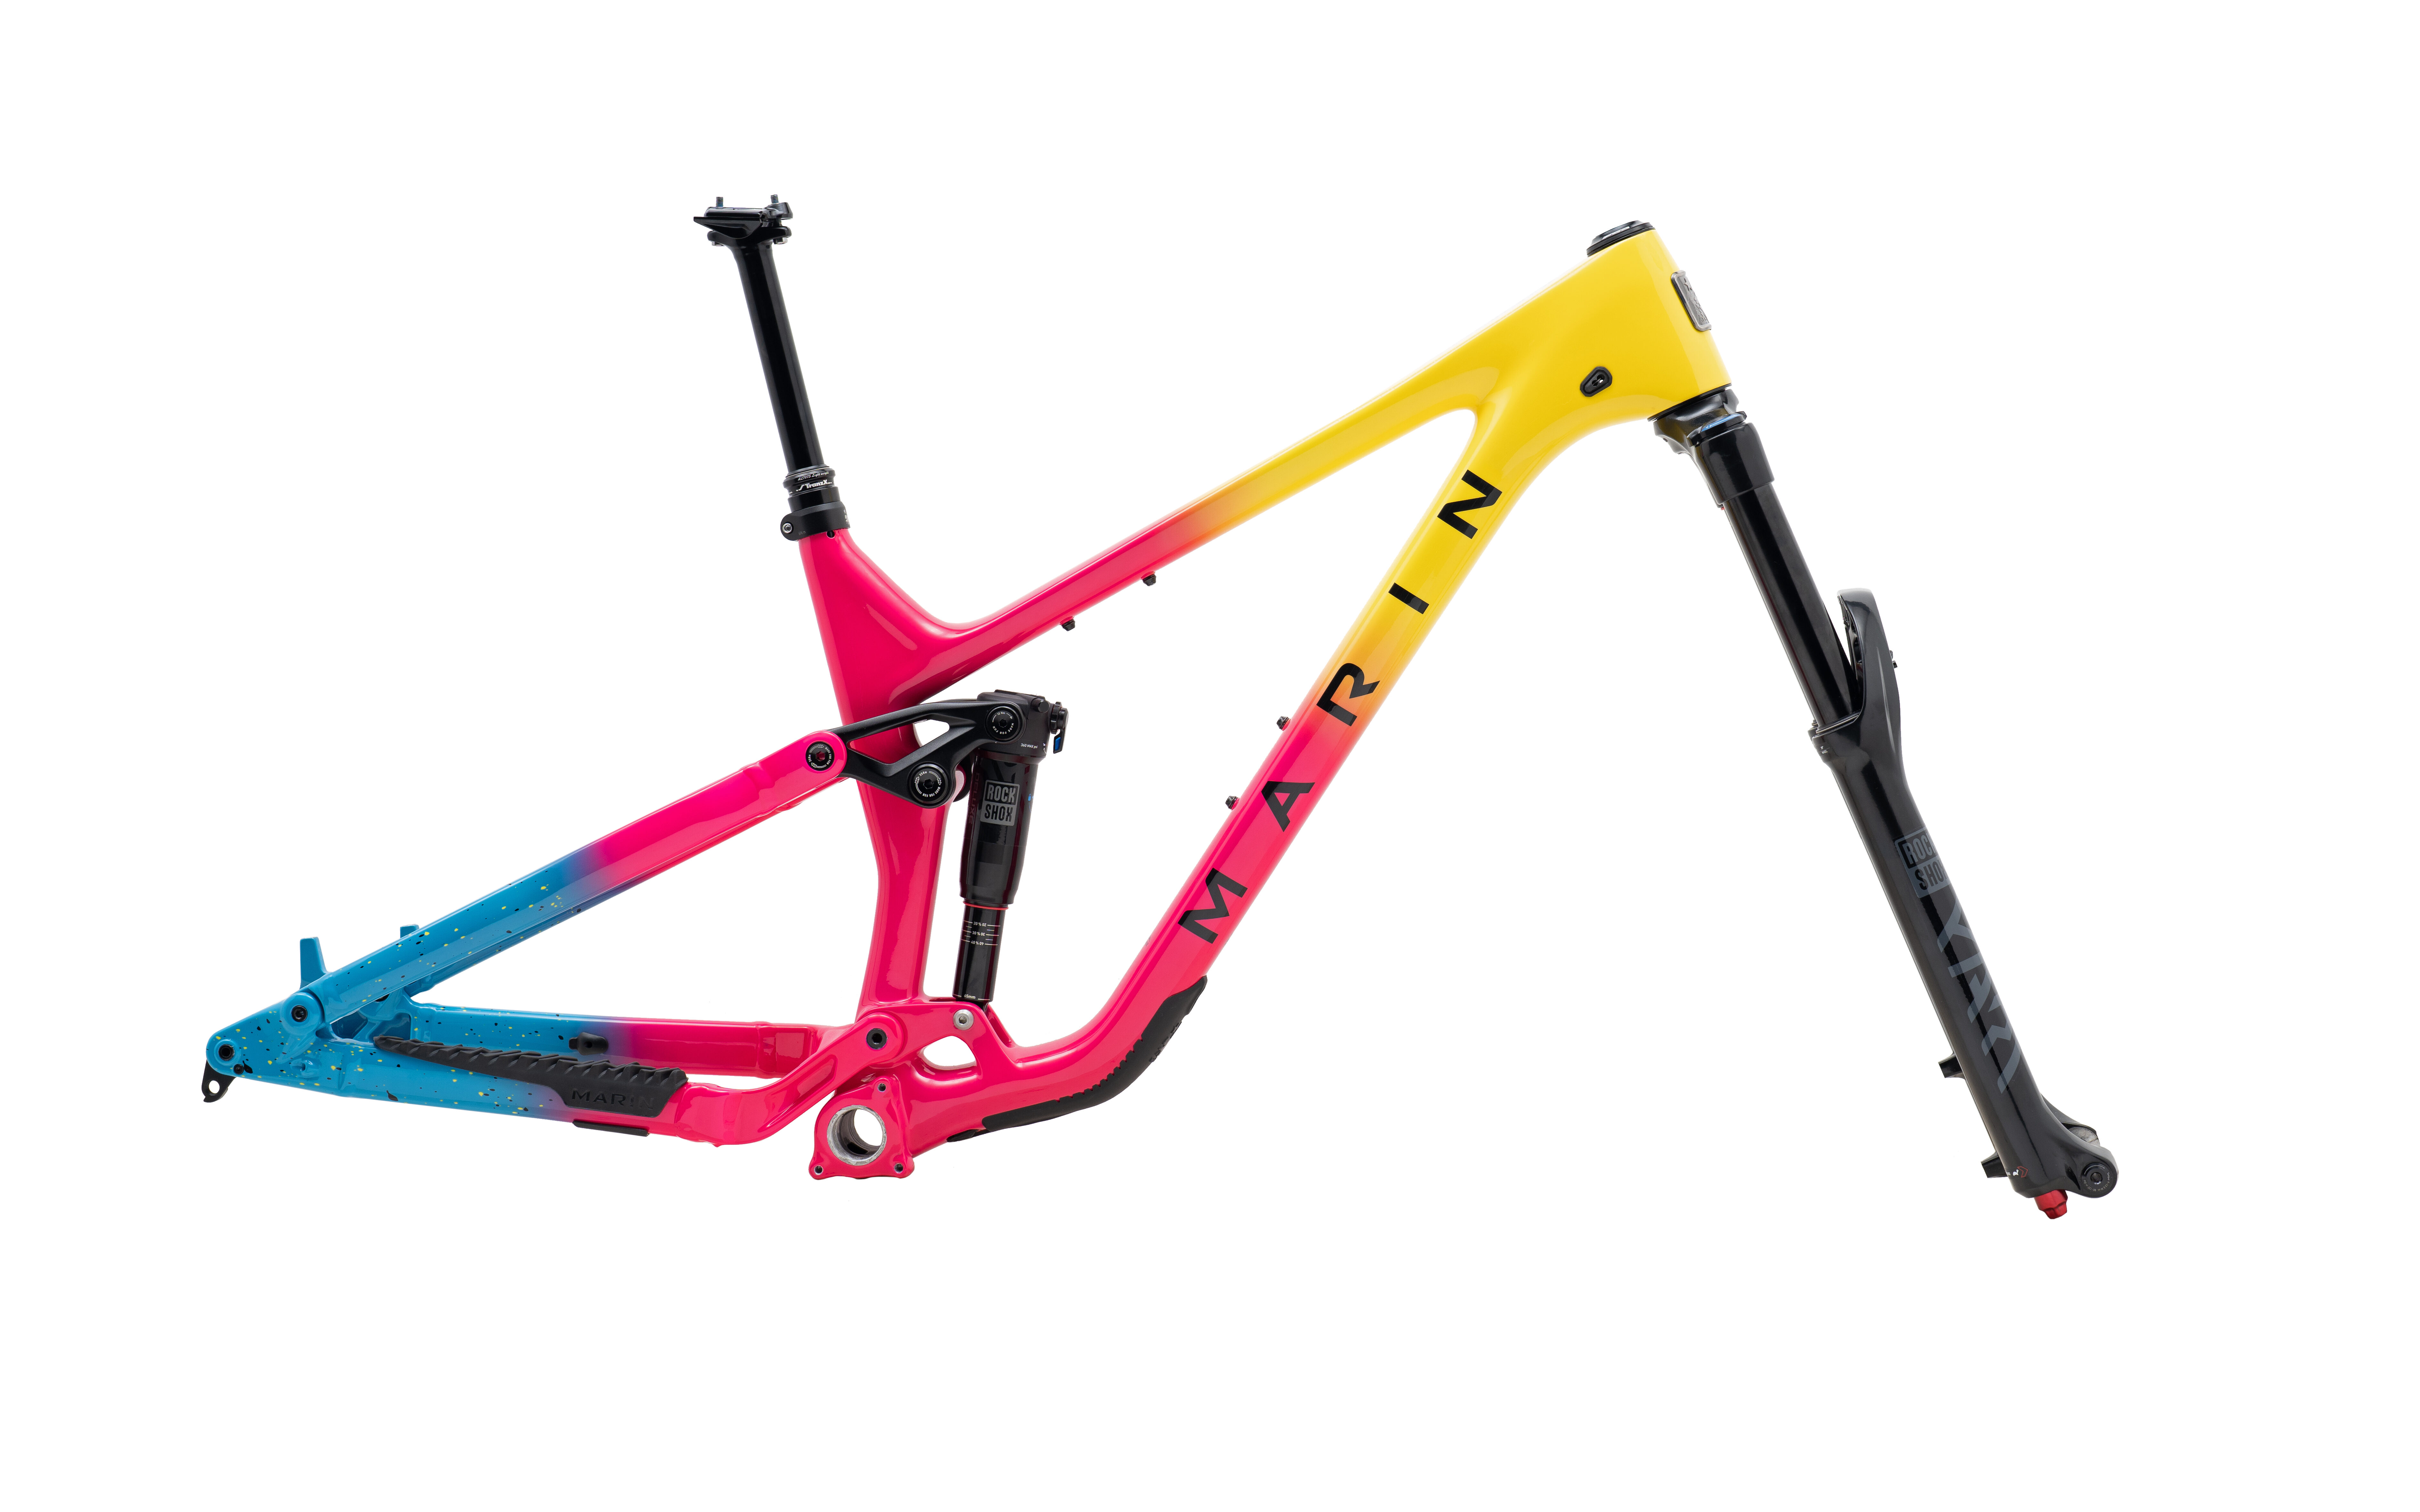 Hottest Bike Ever? Limited Edition Marin Alpine Trail Fun² Frameset Includes Autographed Hat